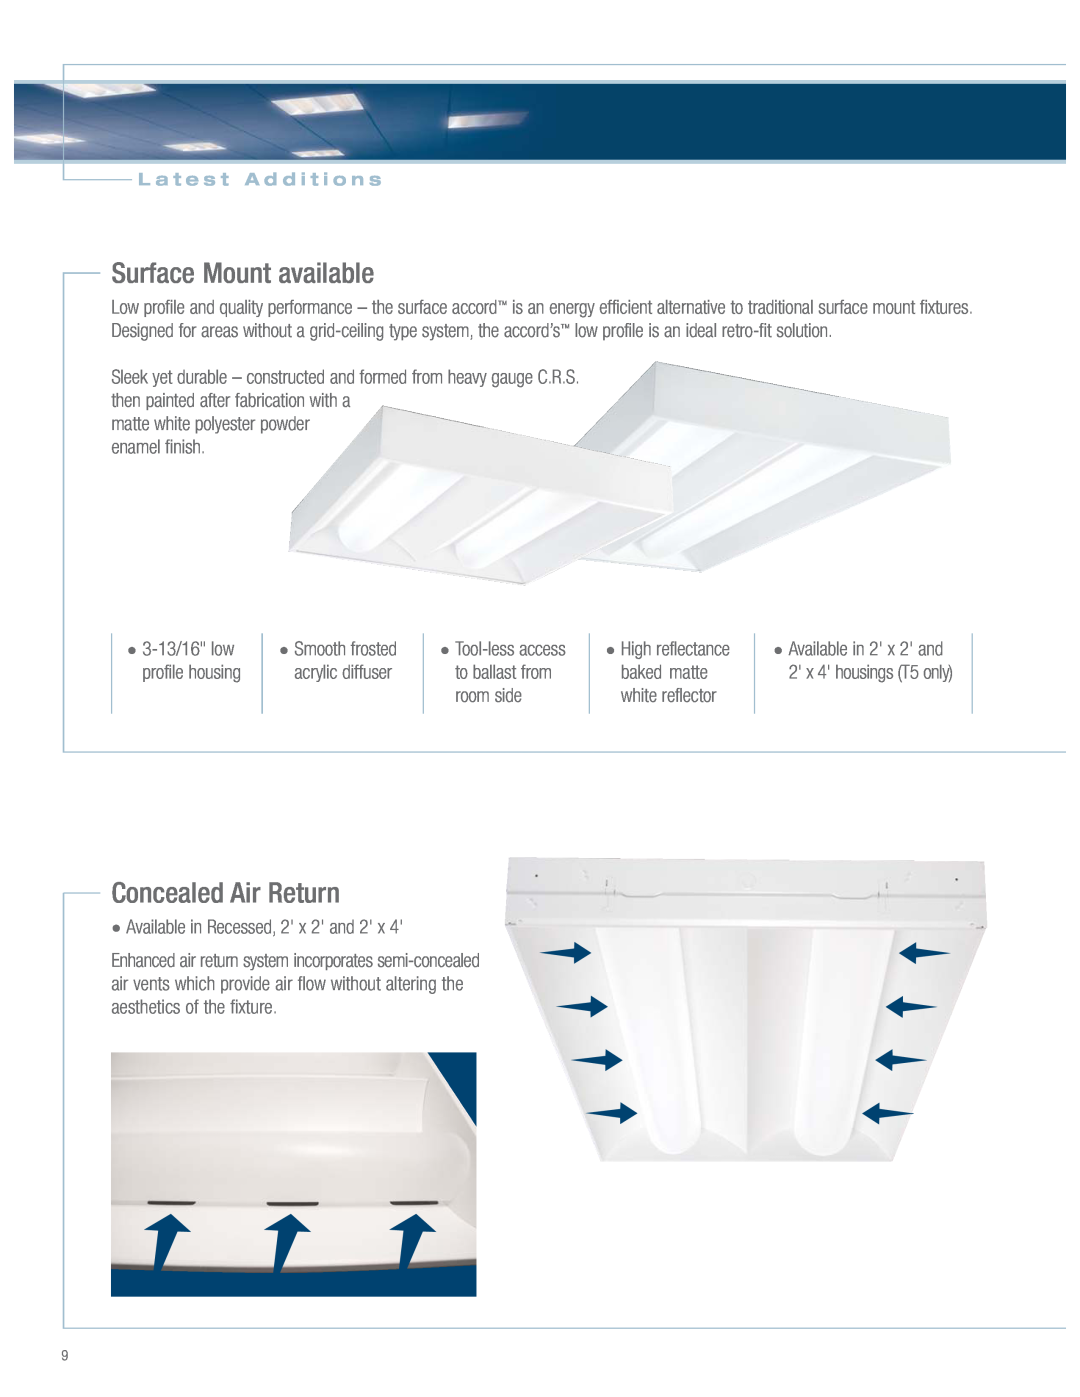 Cooper Lighting Accord Series Surface Mount available, Concealed Air Return, matte white polyester powder enamel finish 